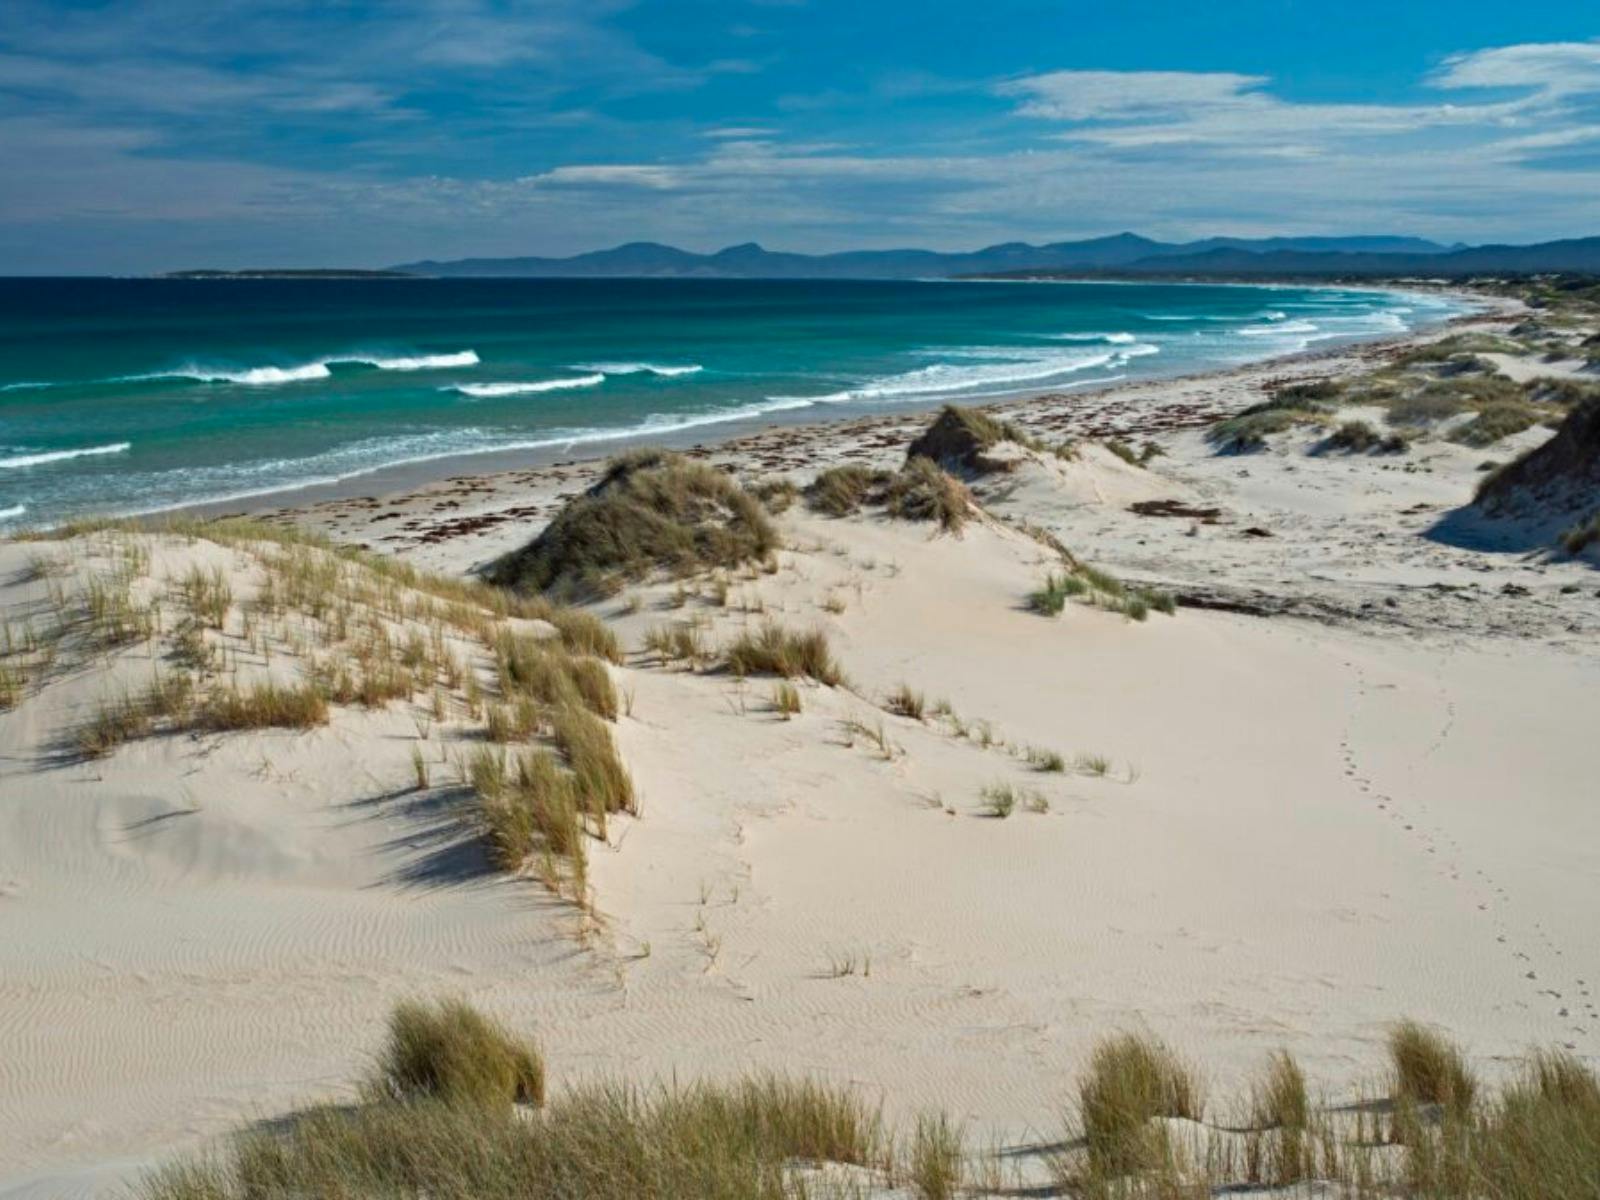 Captivating beach view along the picturesque coastline of North West Tas - Tour with Coastline Tours